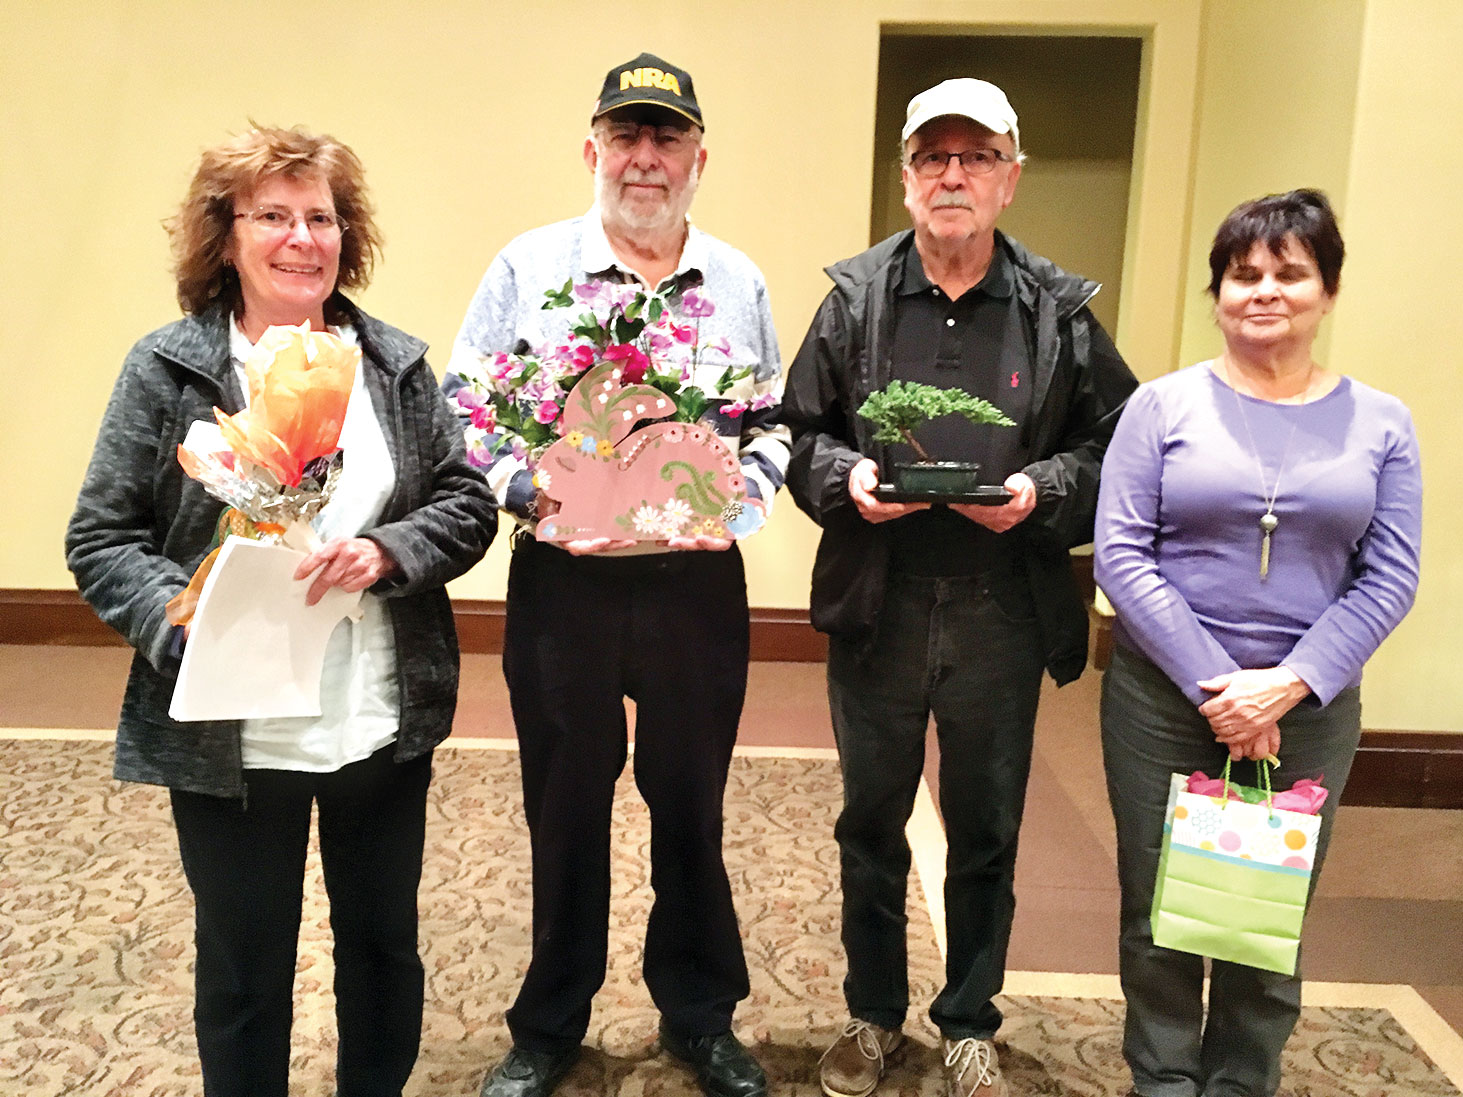 Door prize winners: Sue Rodgers, Andre Marrou, Ed Laub and Peggy Backes; photo by Janie Cindric